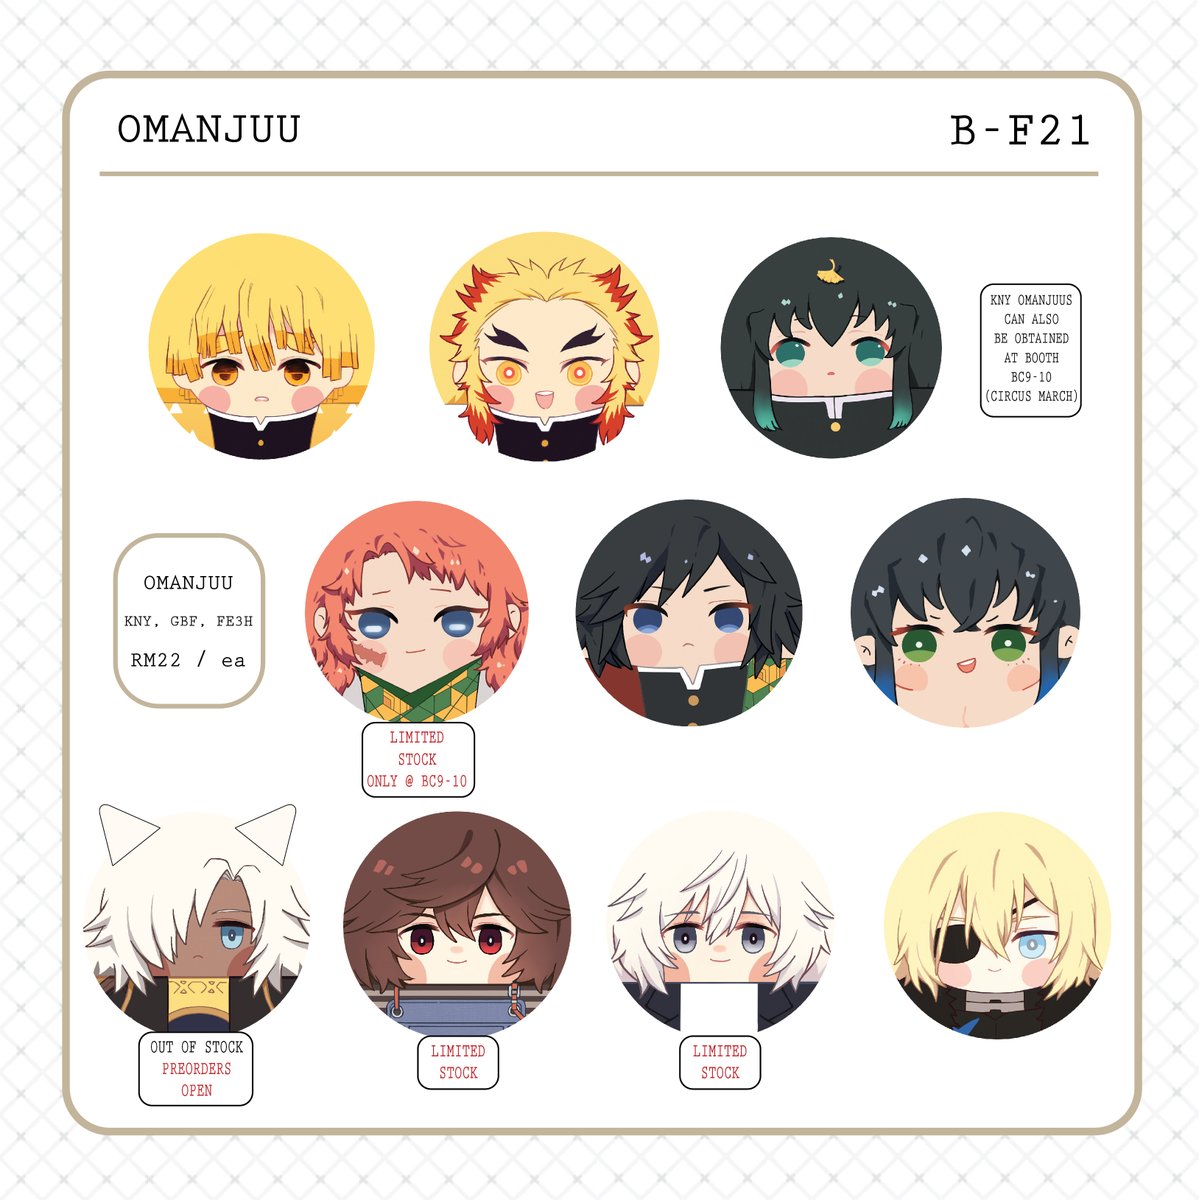 (1/1) B-F21 #CF2019 Merch catalogue!

These are some of our merch - do drop by and visit us!

Intl orders are open btw! Though I can only manage them after Christmas, but if you are interested in any of the items do drop me a dm!

Sorry for the repost; fixed some things 